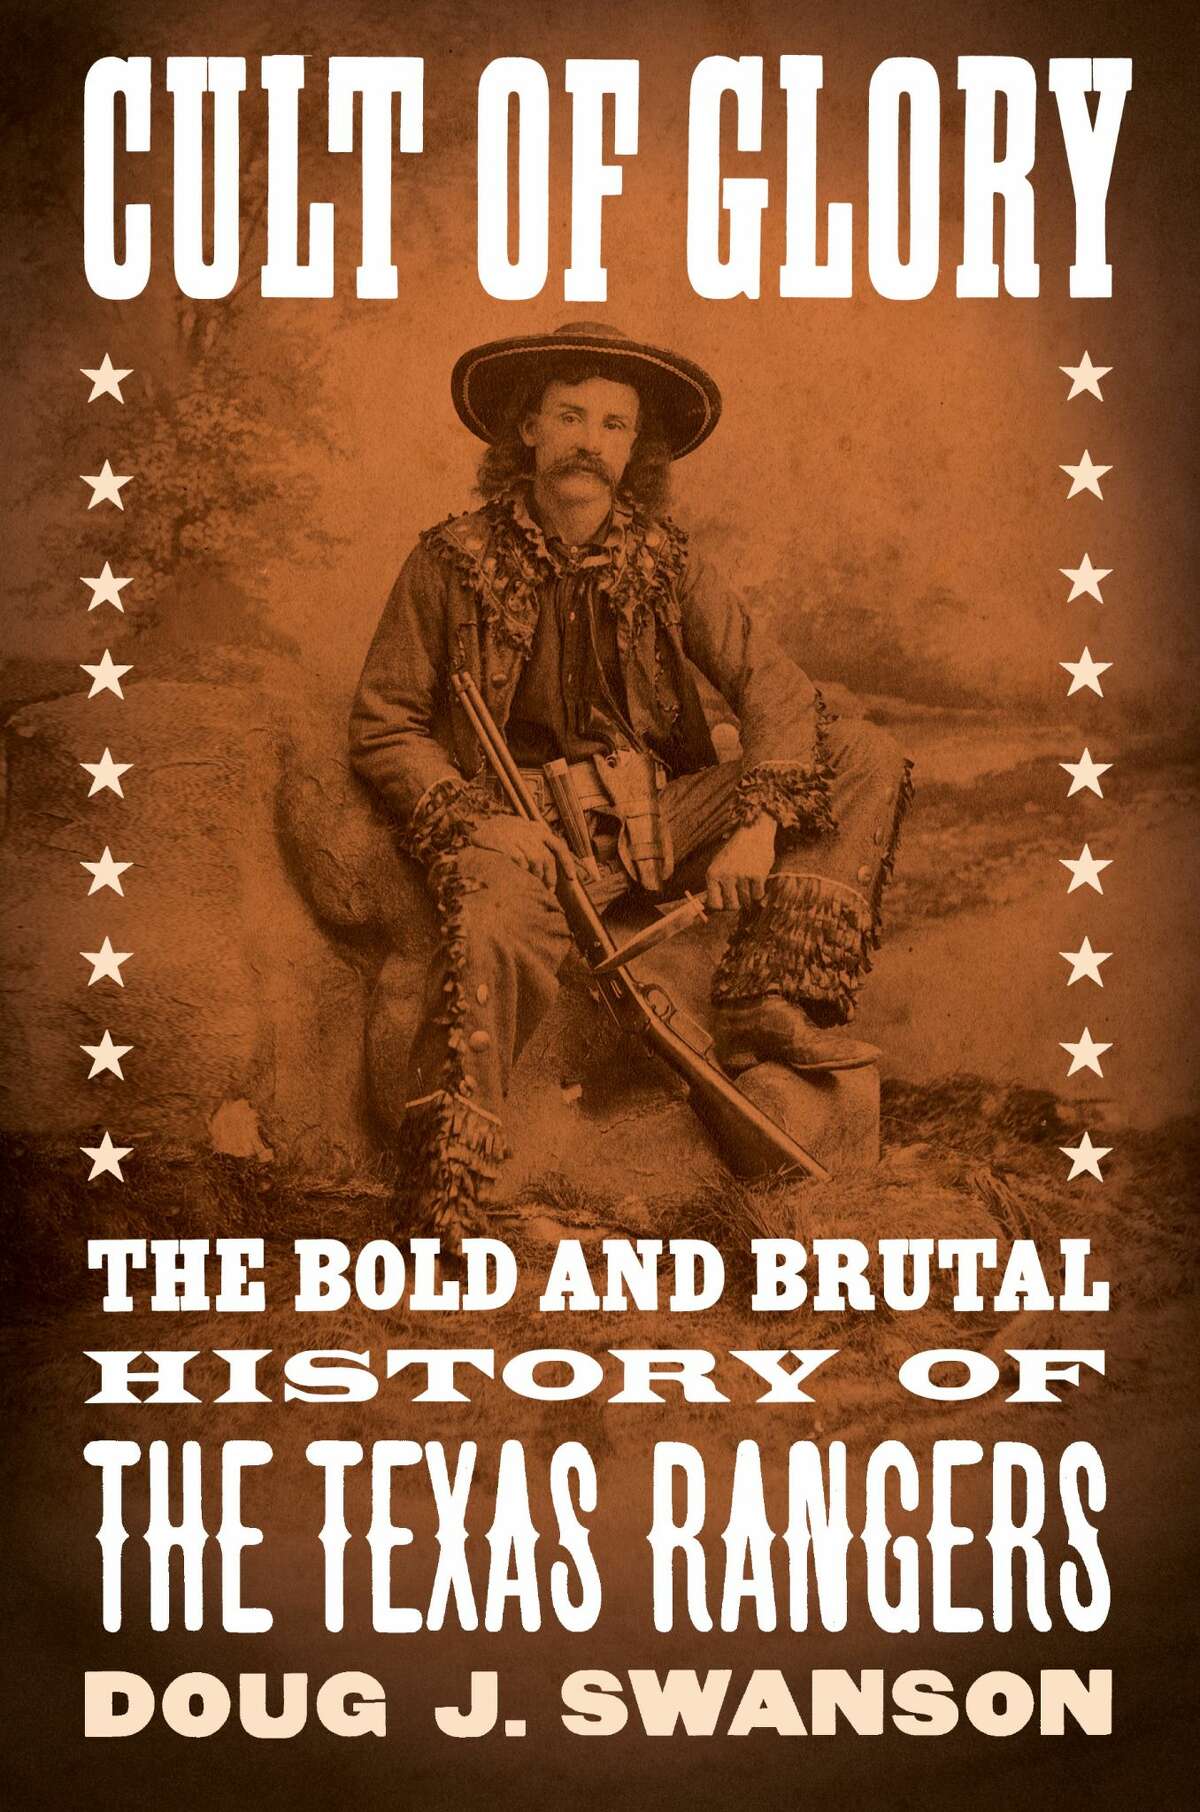 “Cult of Glory: The Bold and Brutal History of the Texas Rangers” published by Viking.